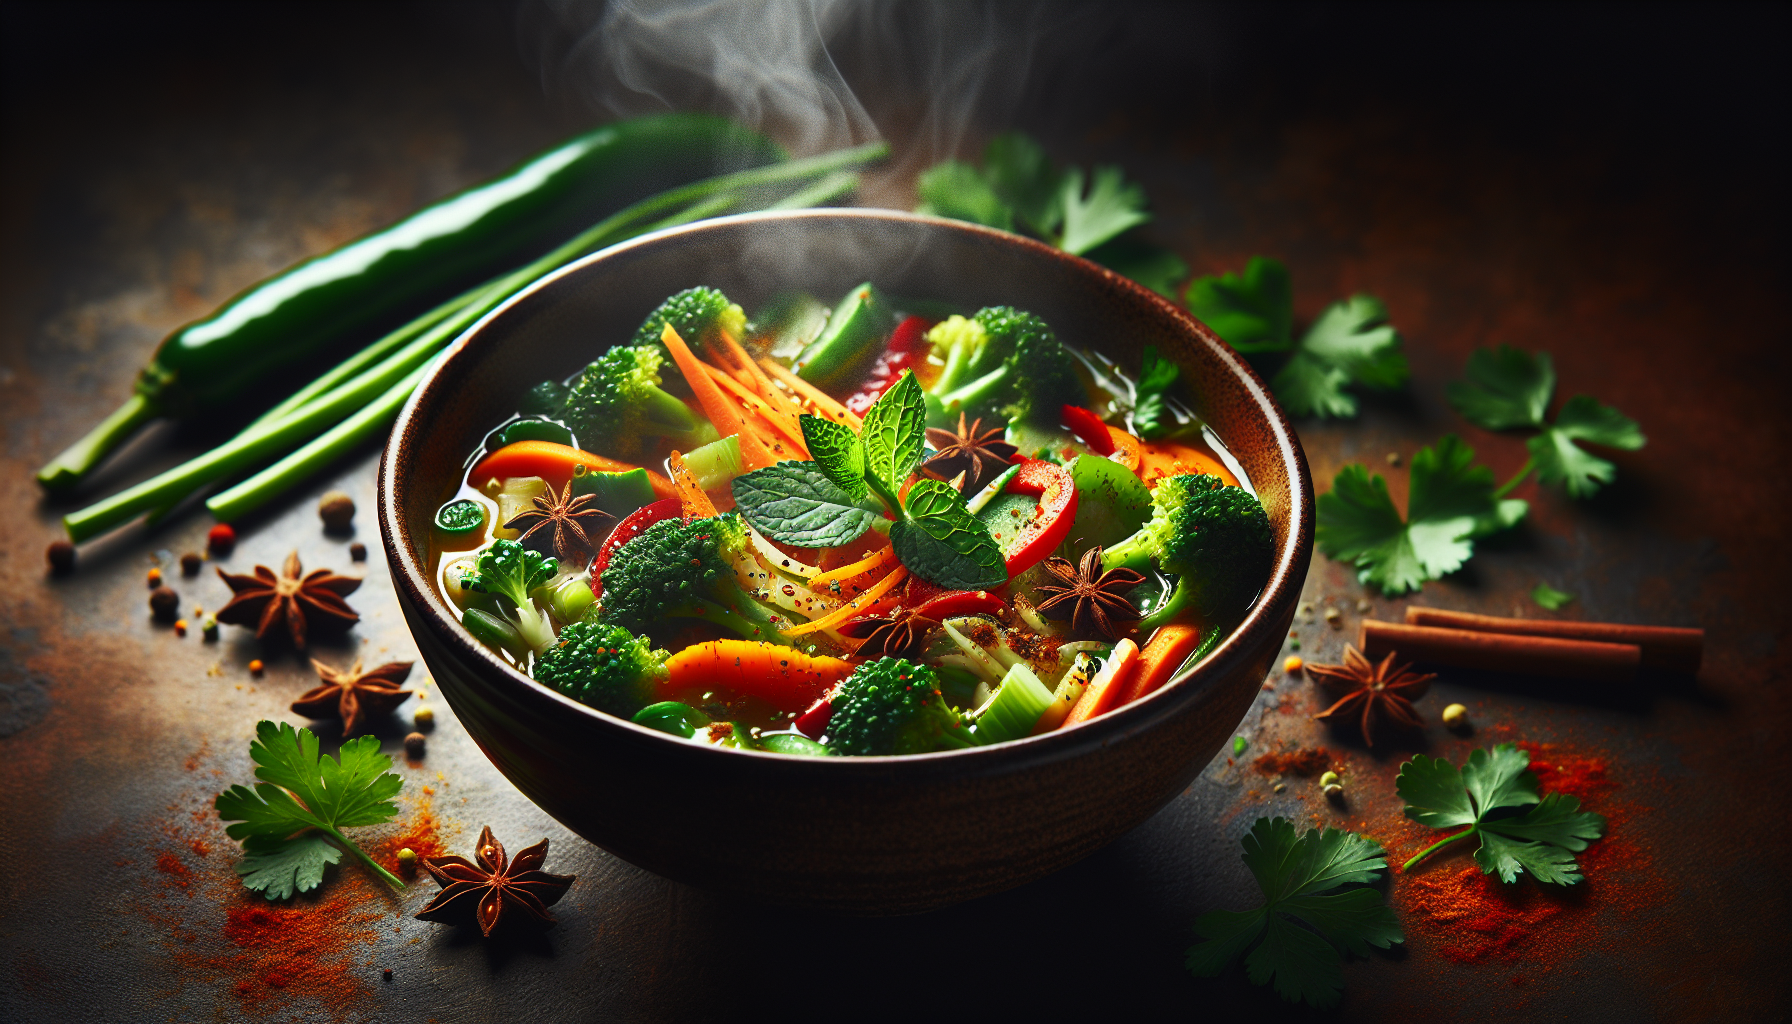 Can You Suggest A Fast And Delightful Chinese Soup Recipe?